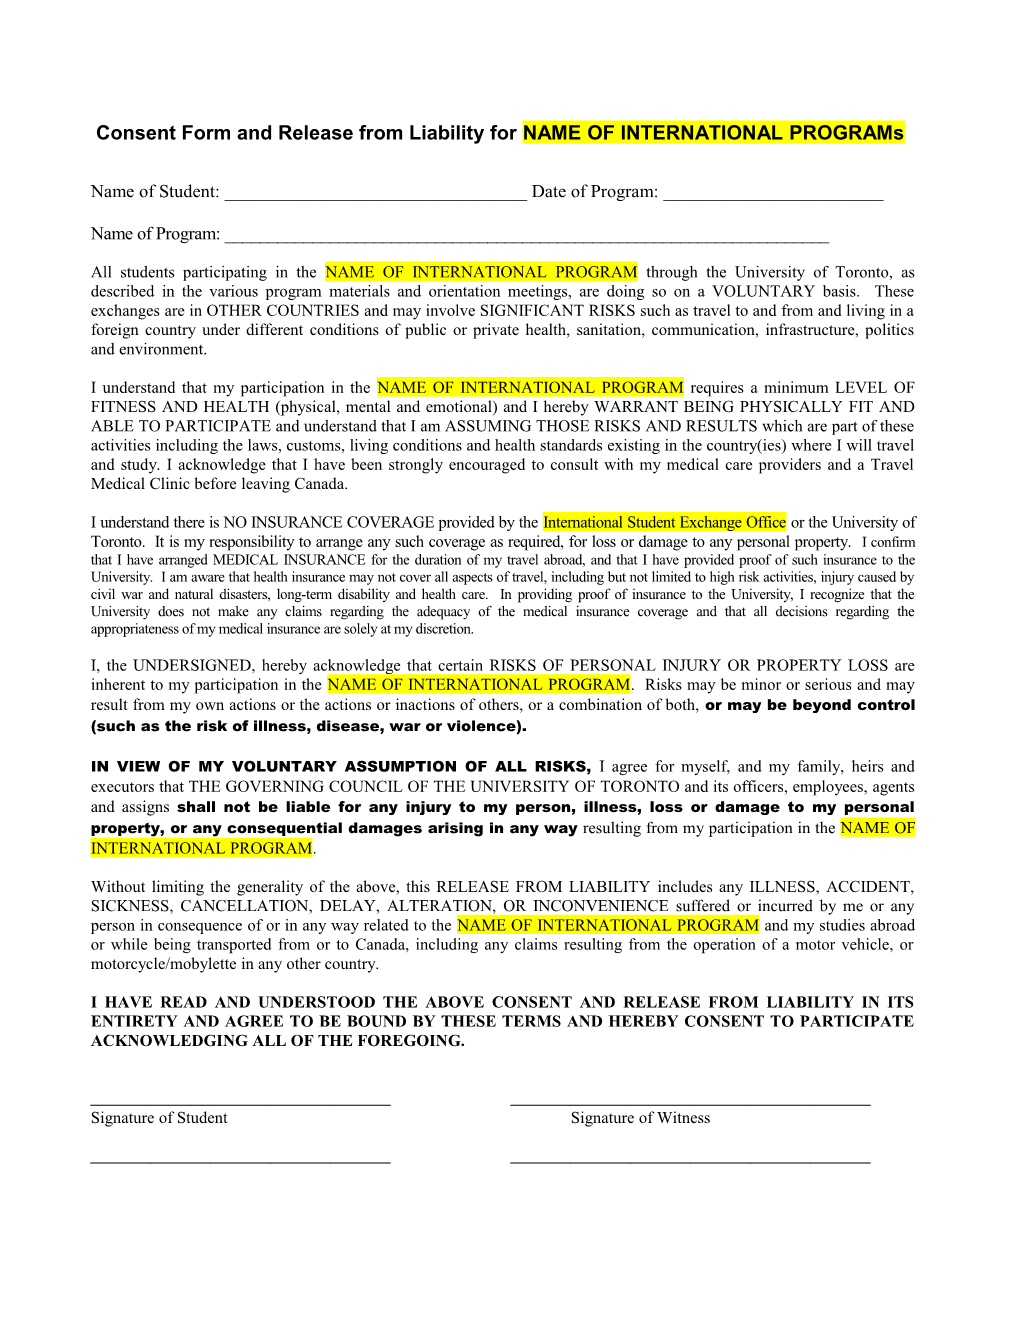 Consent Form and Release from Liability for International Student Exchange Programs